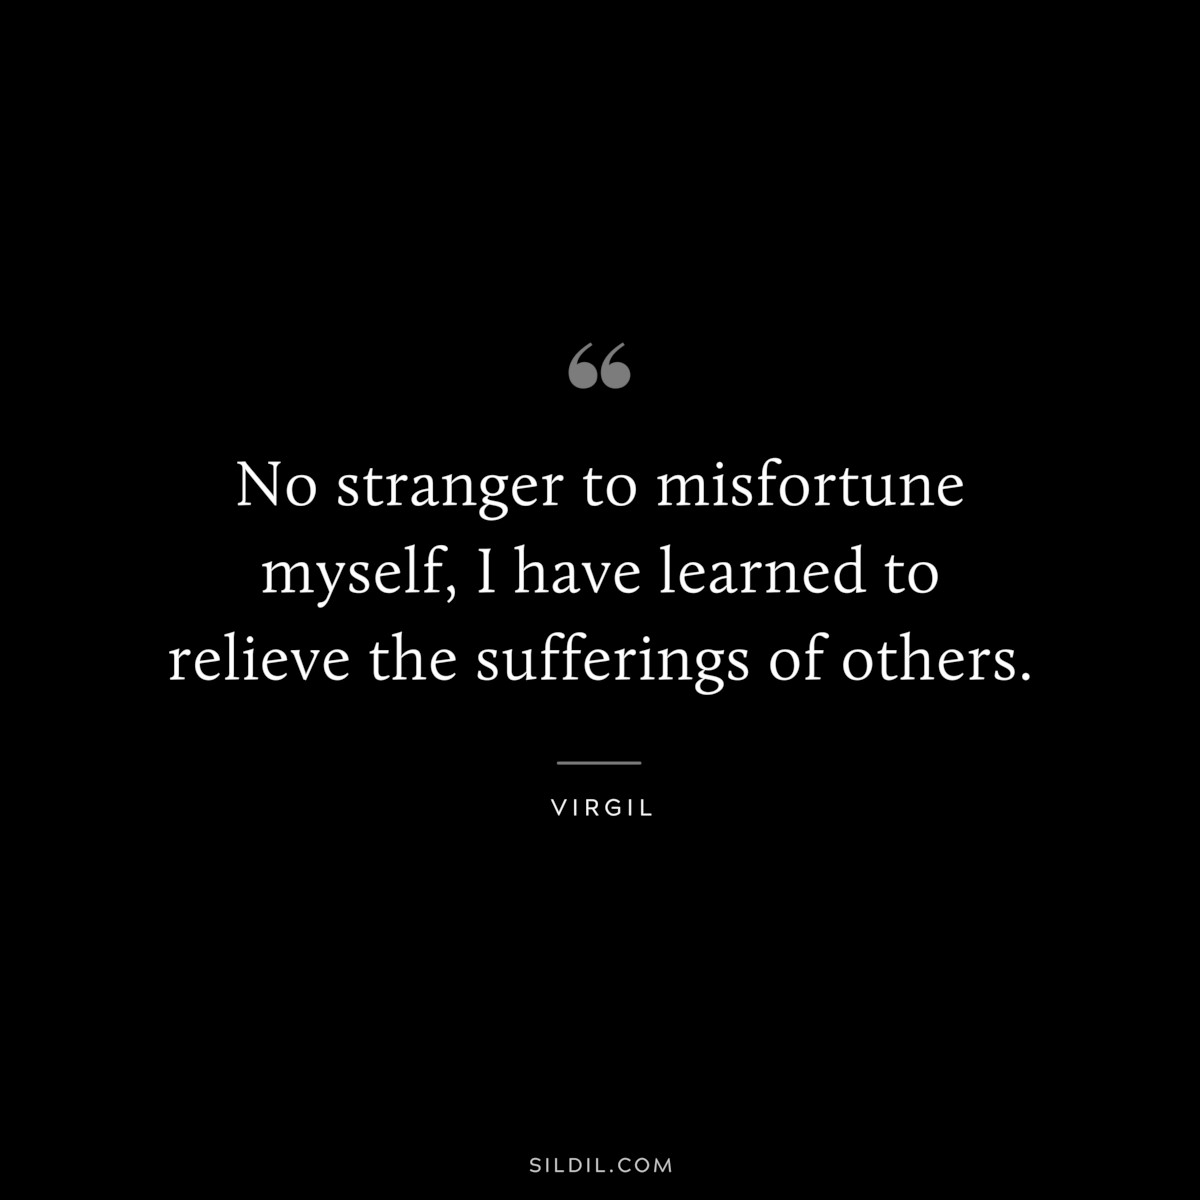 No stranger to misfortune myself, I have learned to relieve the sufferings of others. ― Virgil